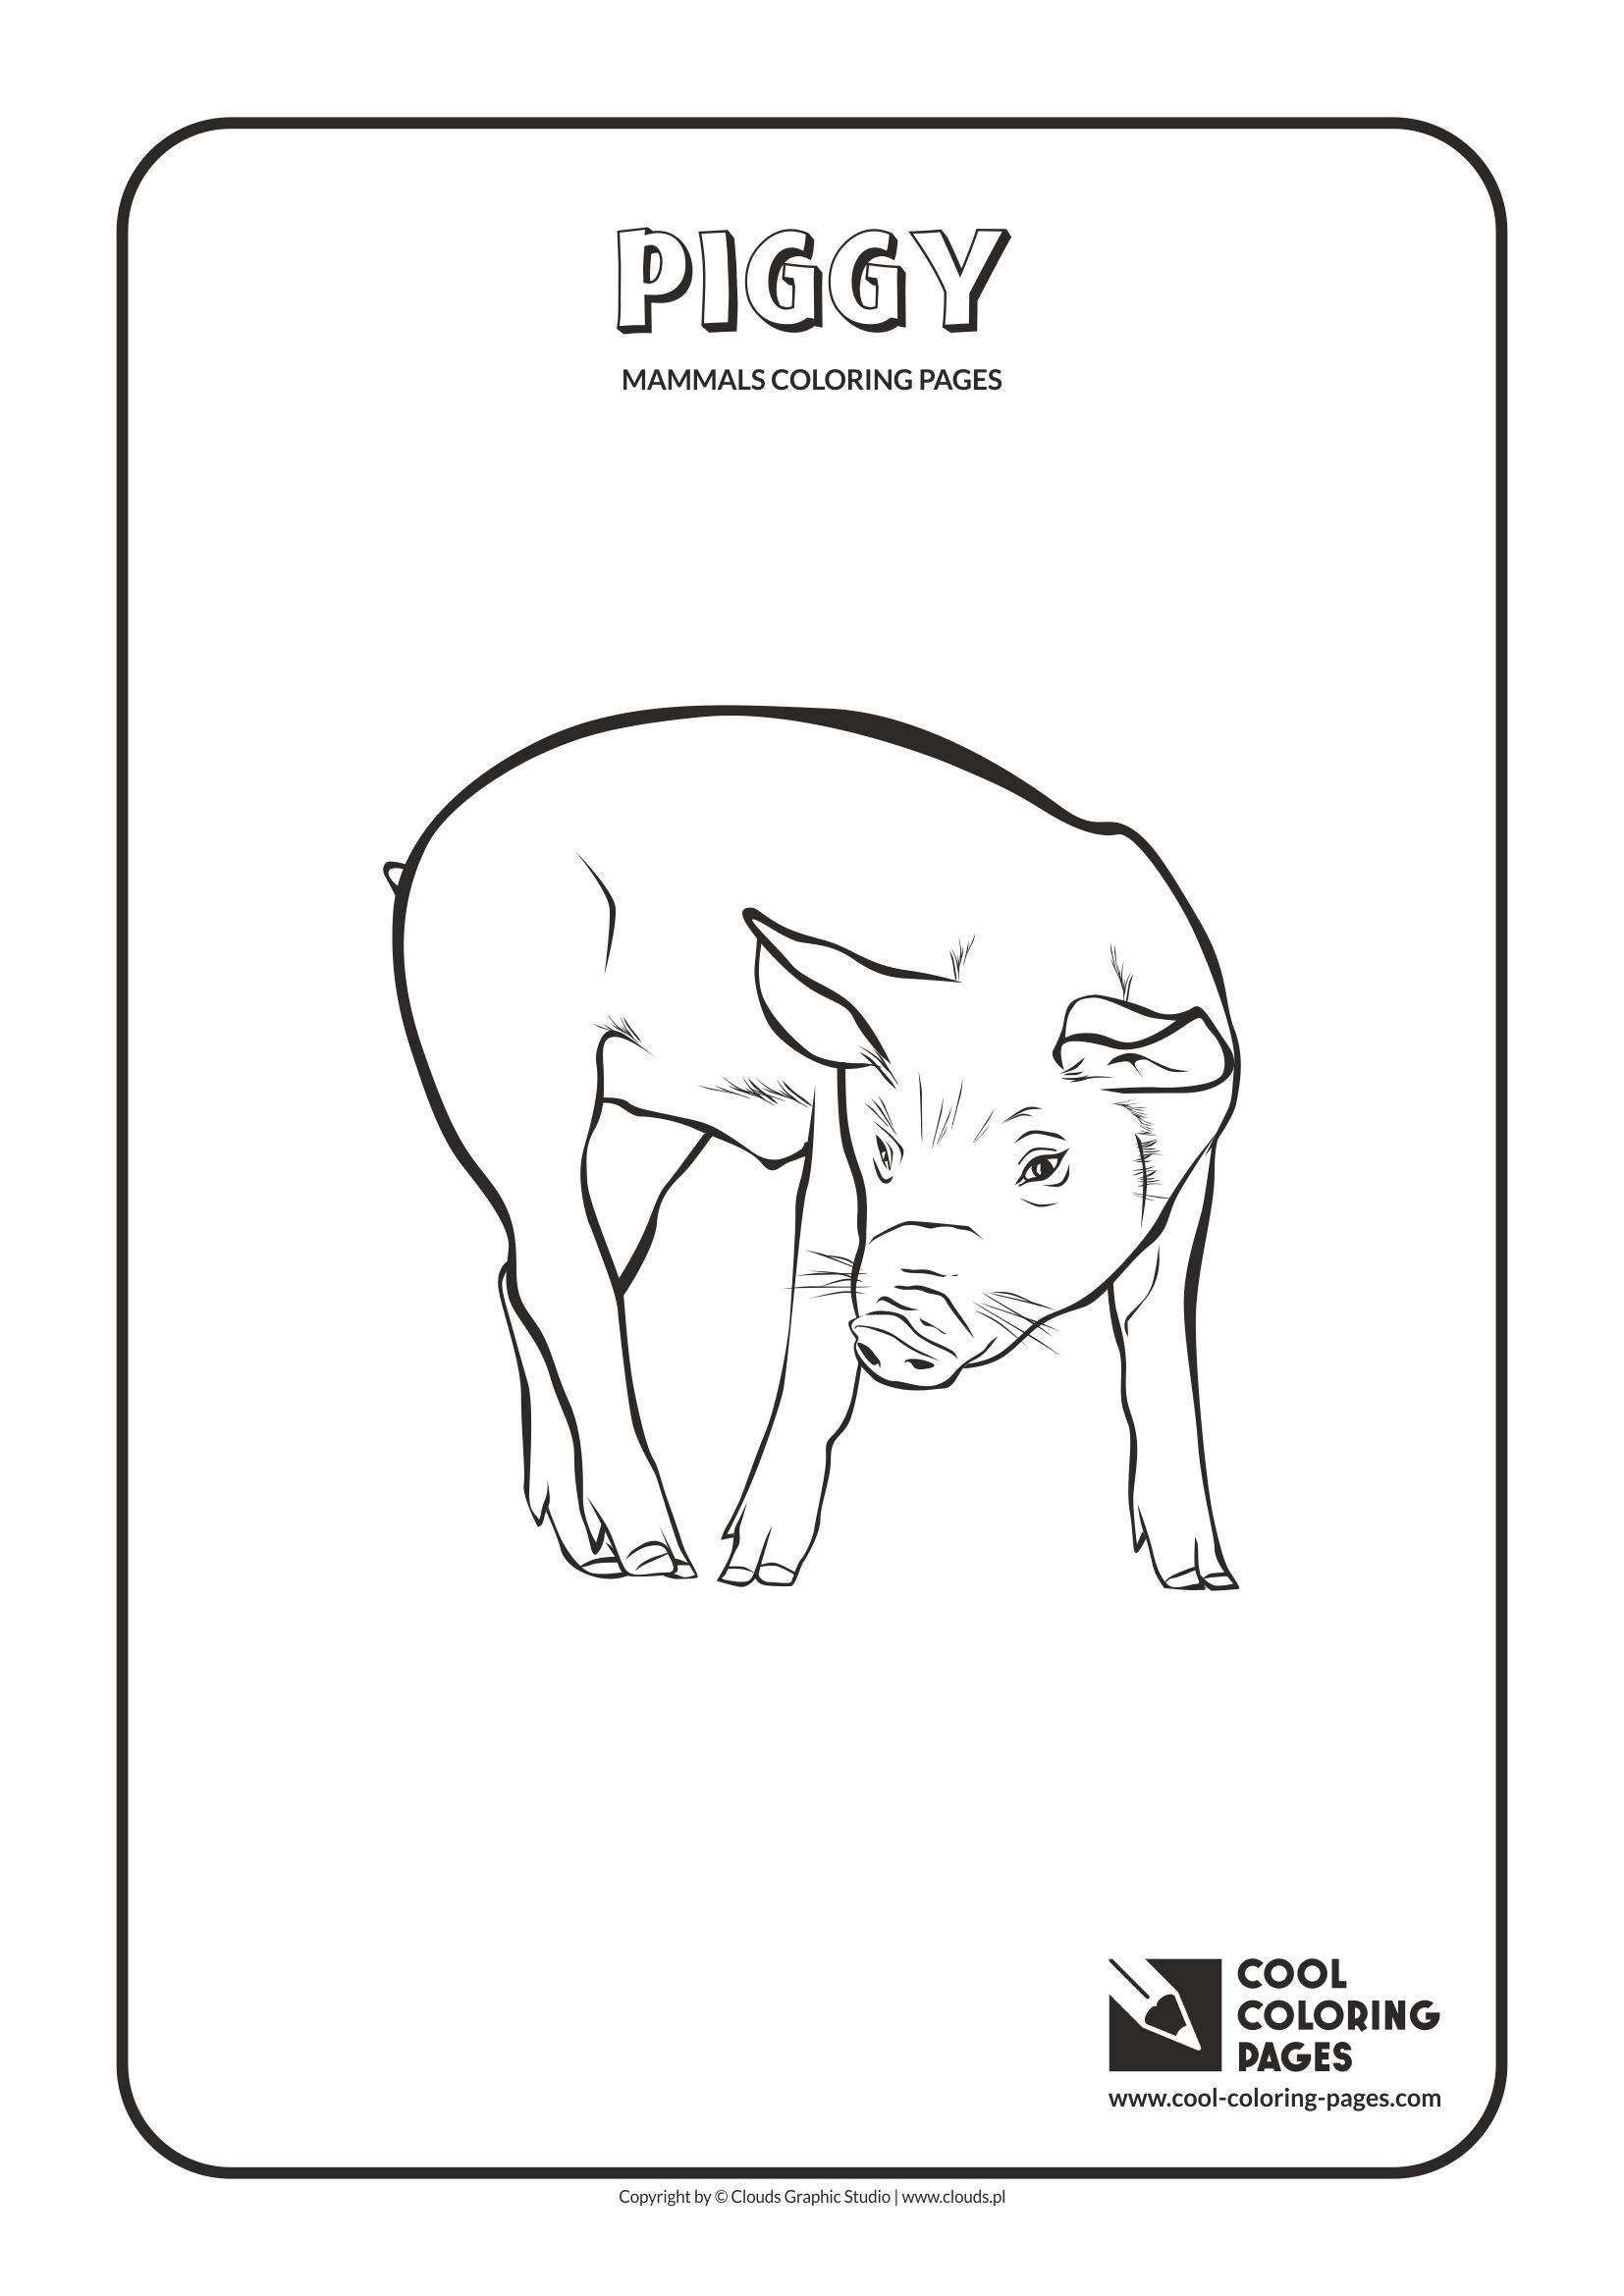 >Cool Coloring Pages - Animals / Piggy / Coloring page with piggy